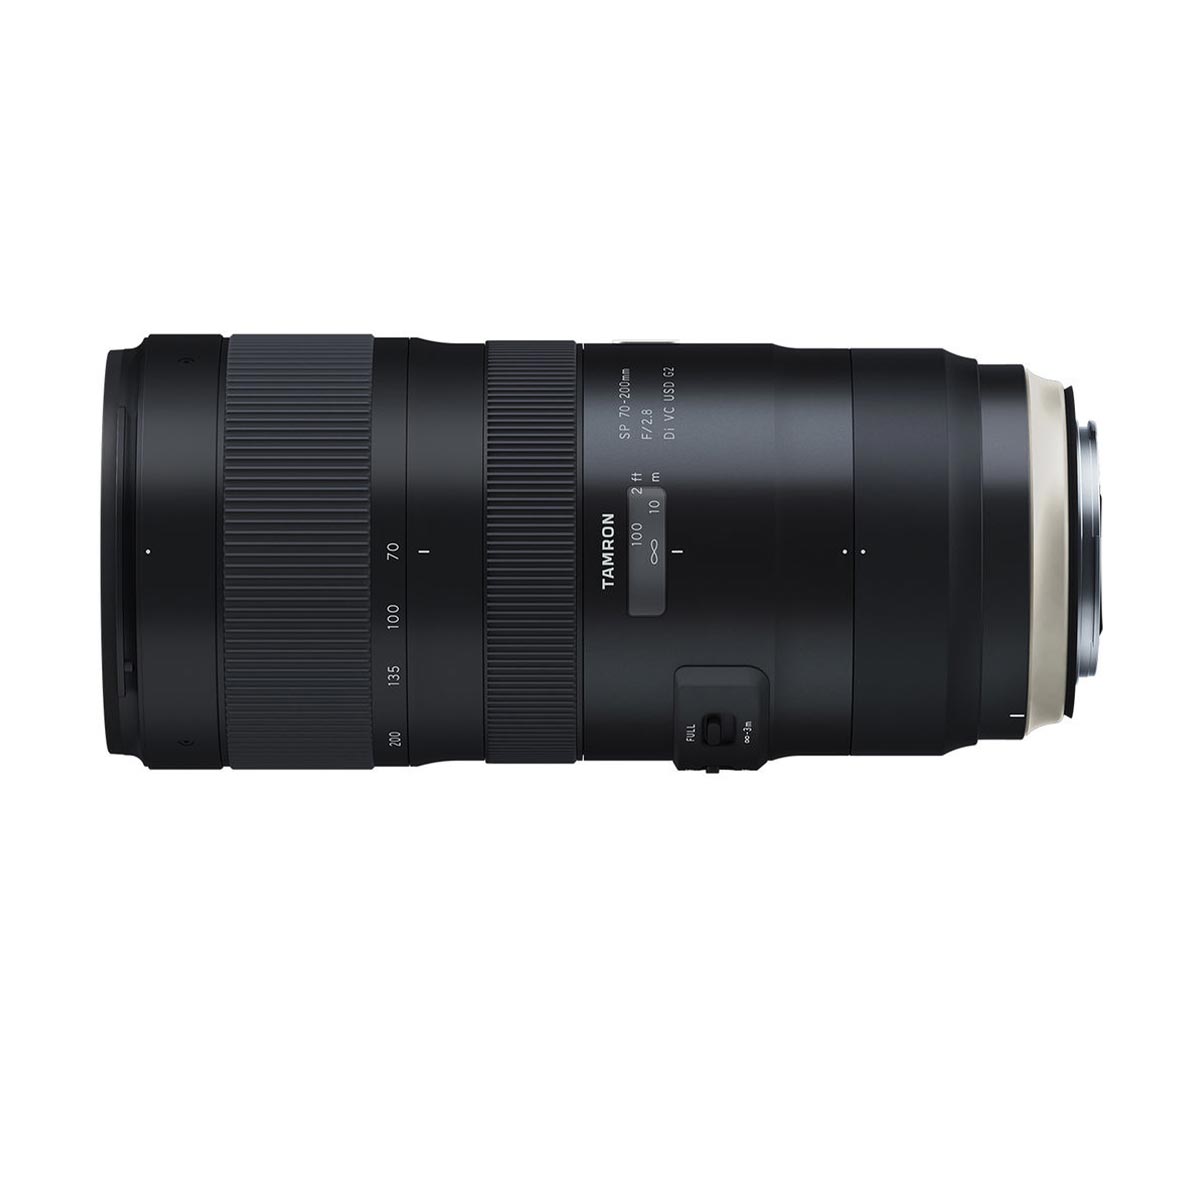 Tamron SP 70-200mm f2.8 DI VC USD G2 Lens for Canon EF